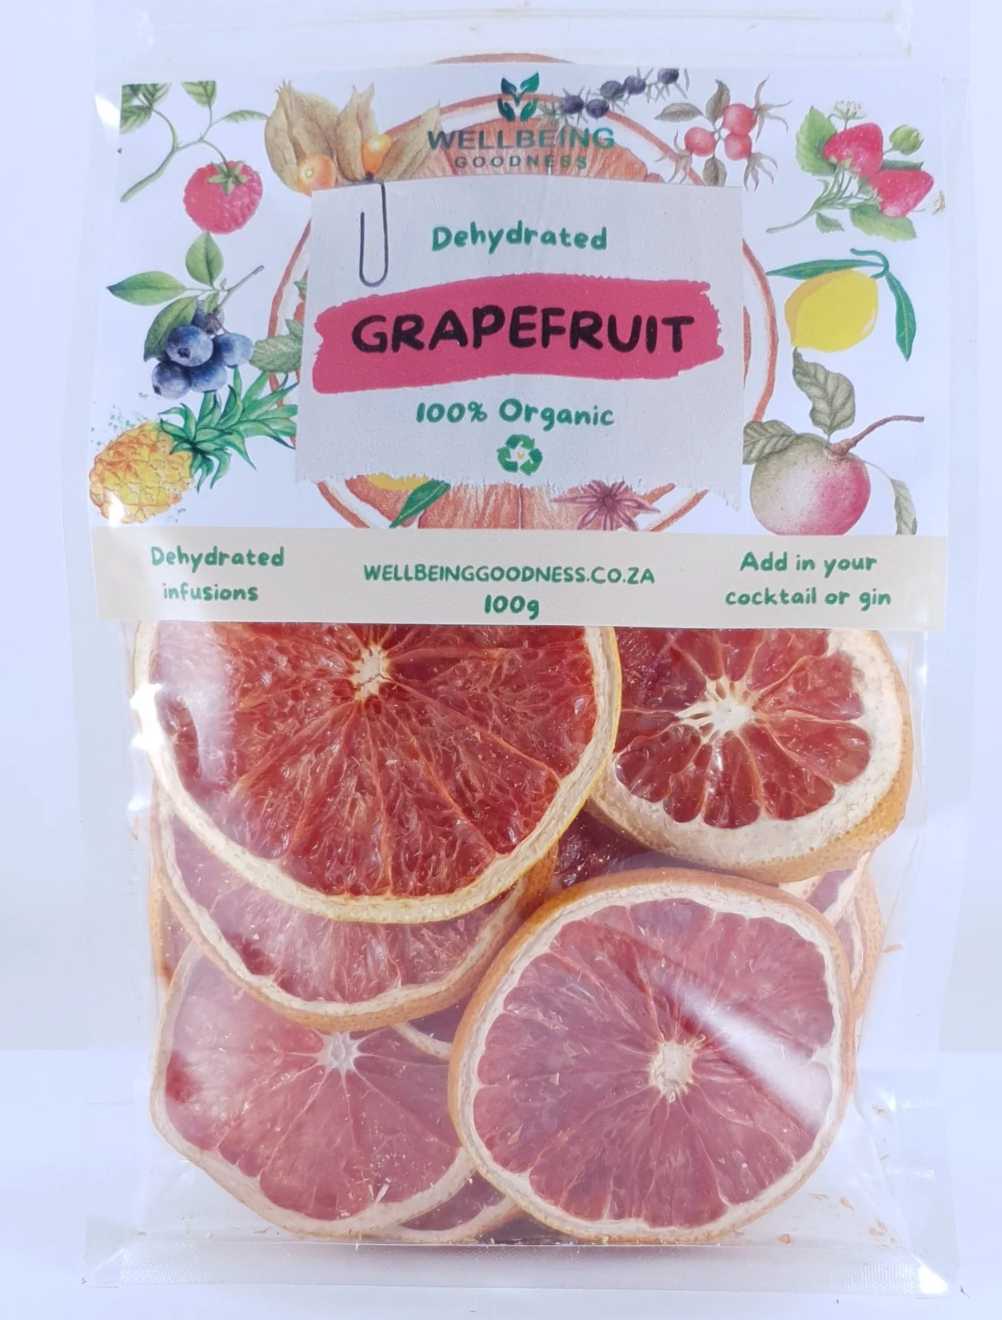 Dehydrated Grapefruit Wellbeing Goodness